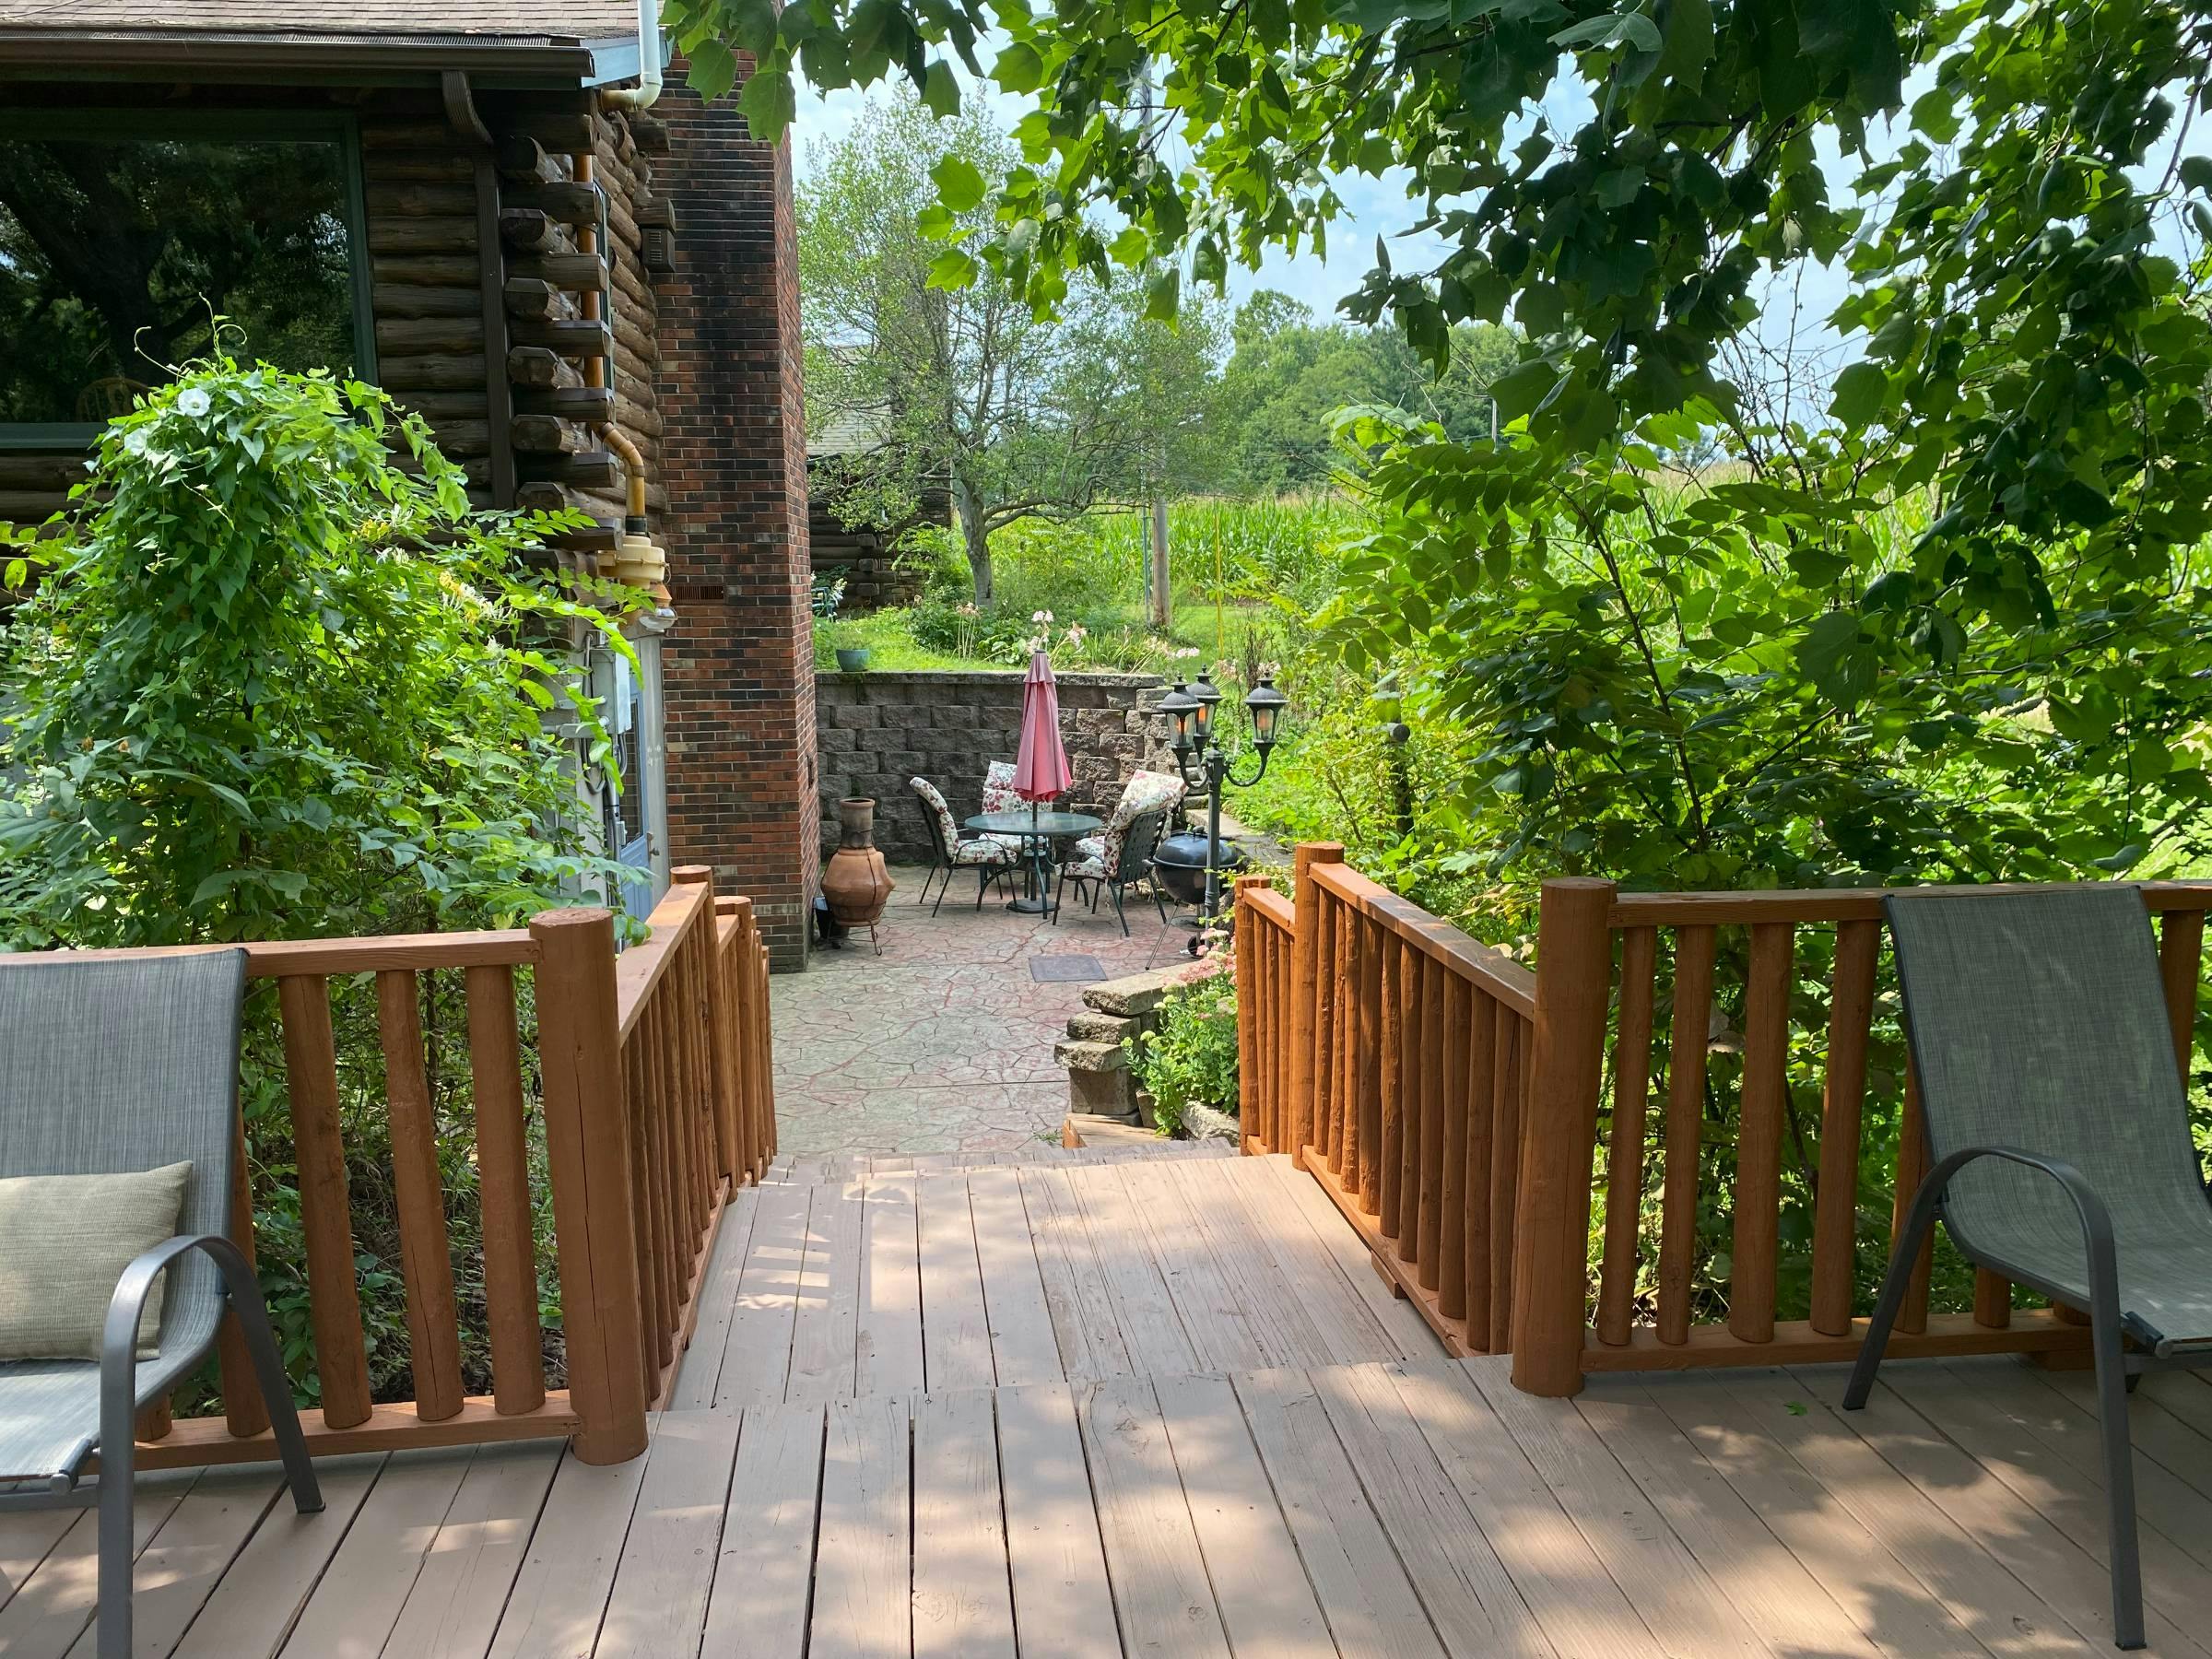 The custom wood deck with seating was recently painted and refreshed - these wide steps lead down to the Kitchen Flat patio and entrance. The wood deck and seating is available to all of our guests.